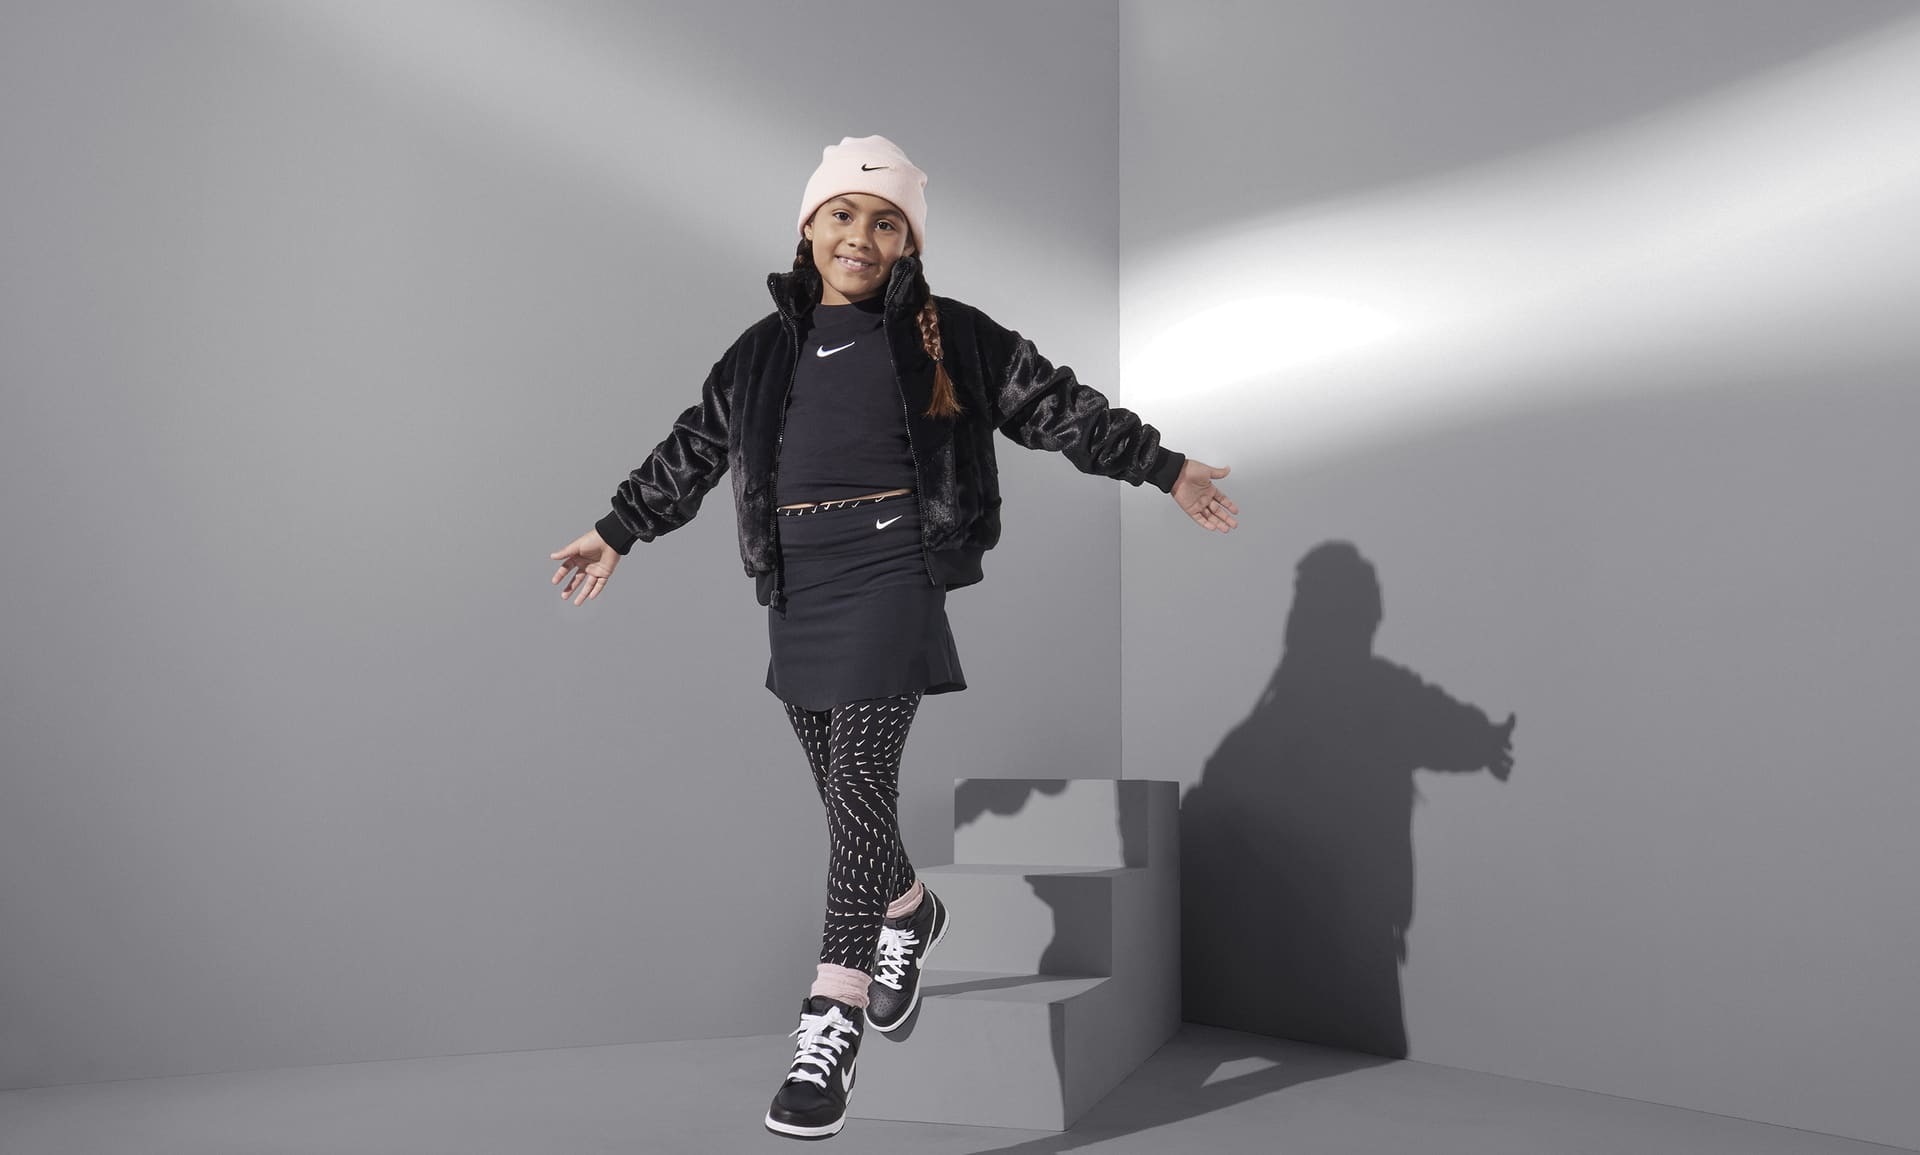 A little obsessed with this #nike spring jacket for the 10-11 year